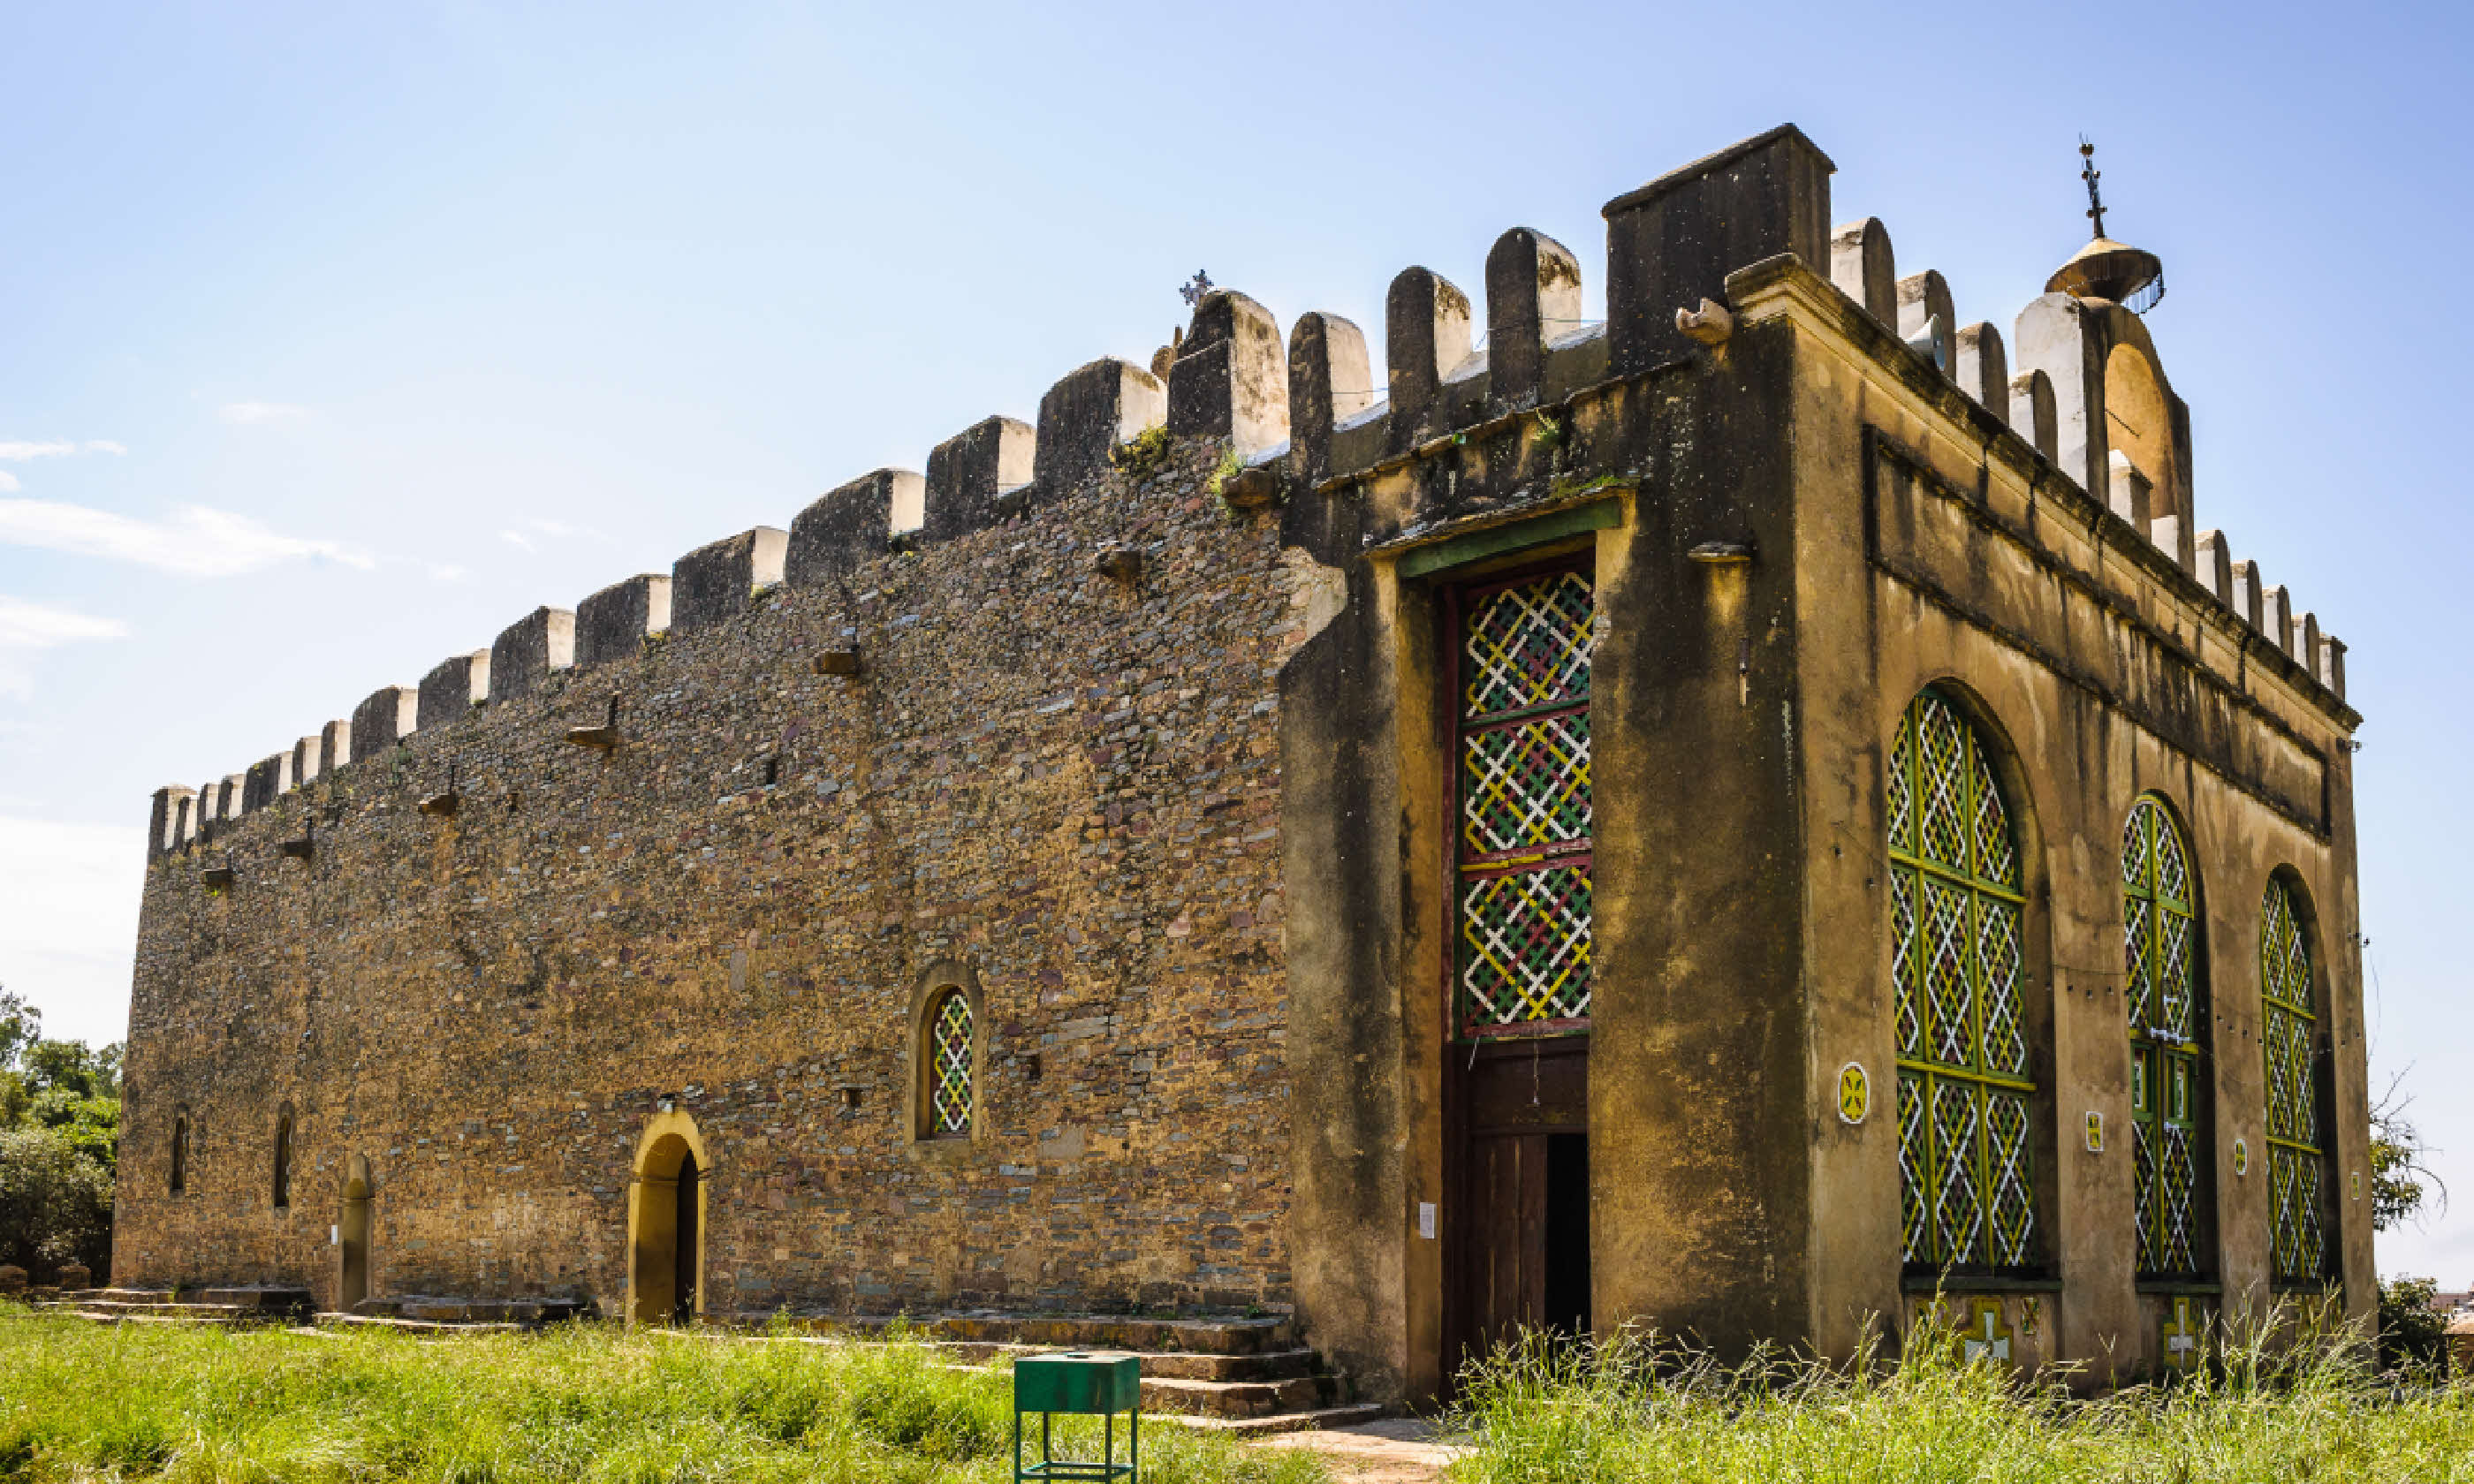 The Chapel of the Tablet, Axum, Ethiopia (Shutterstock)